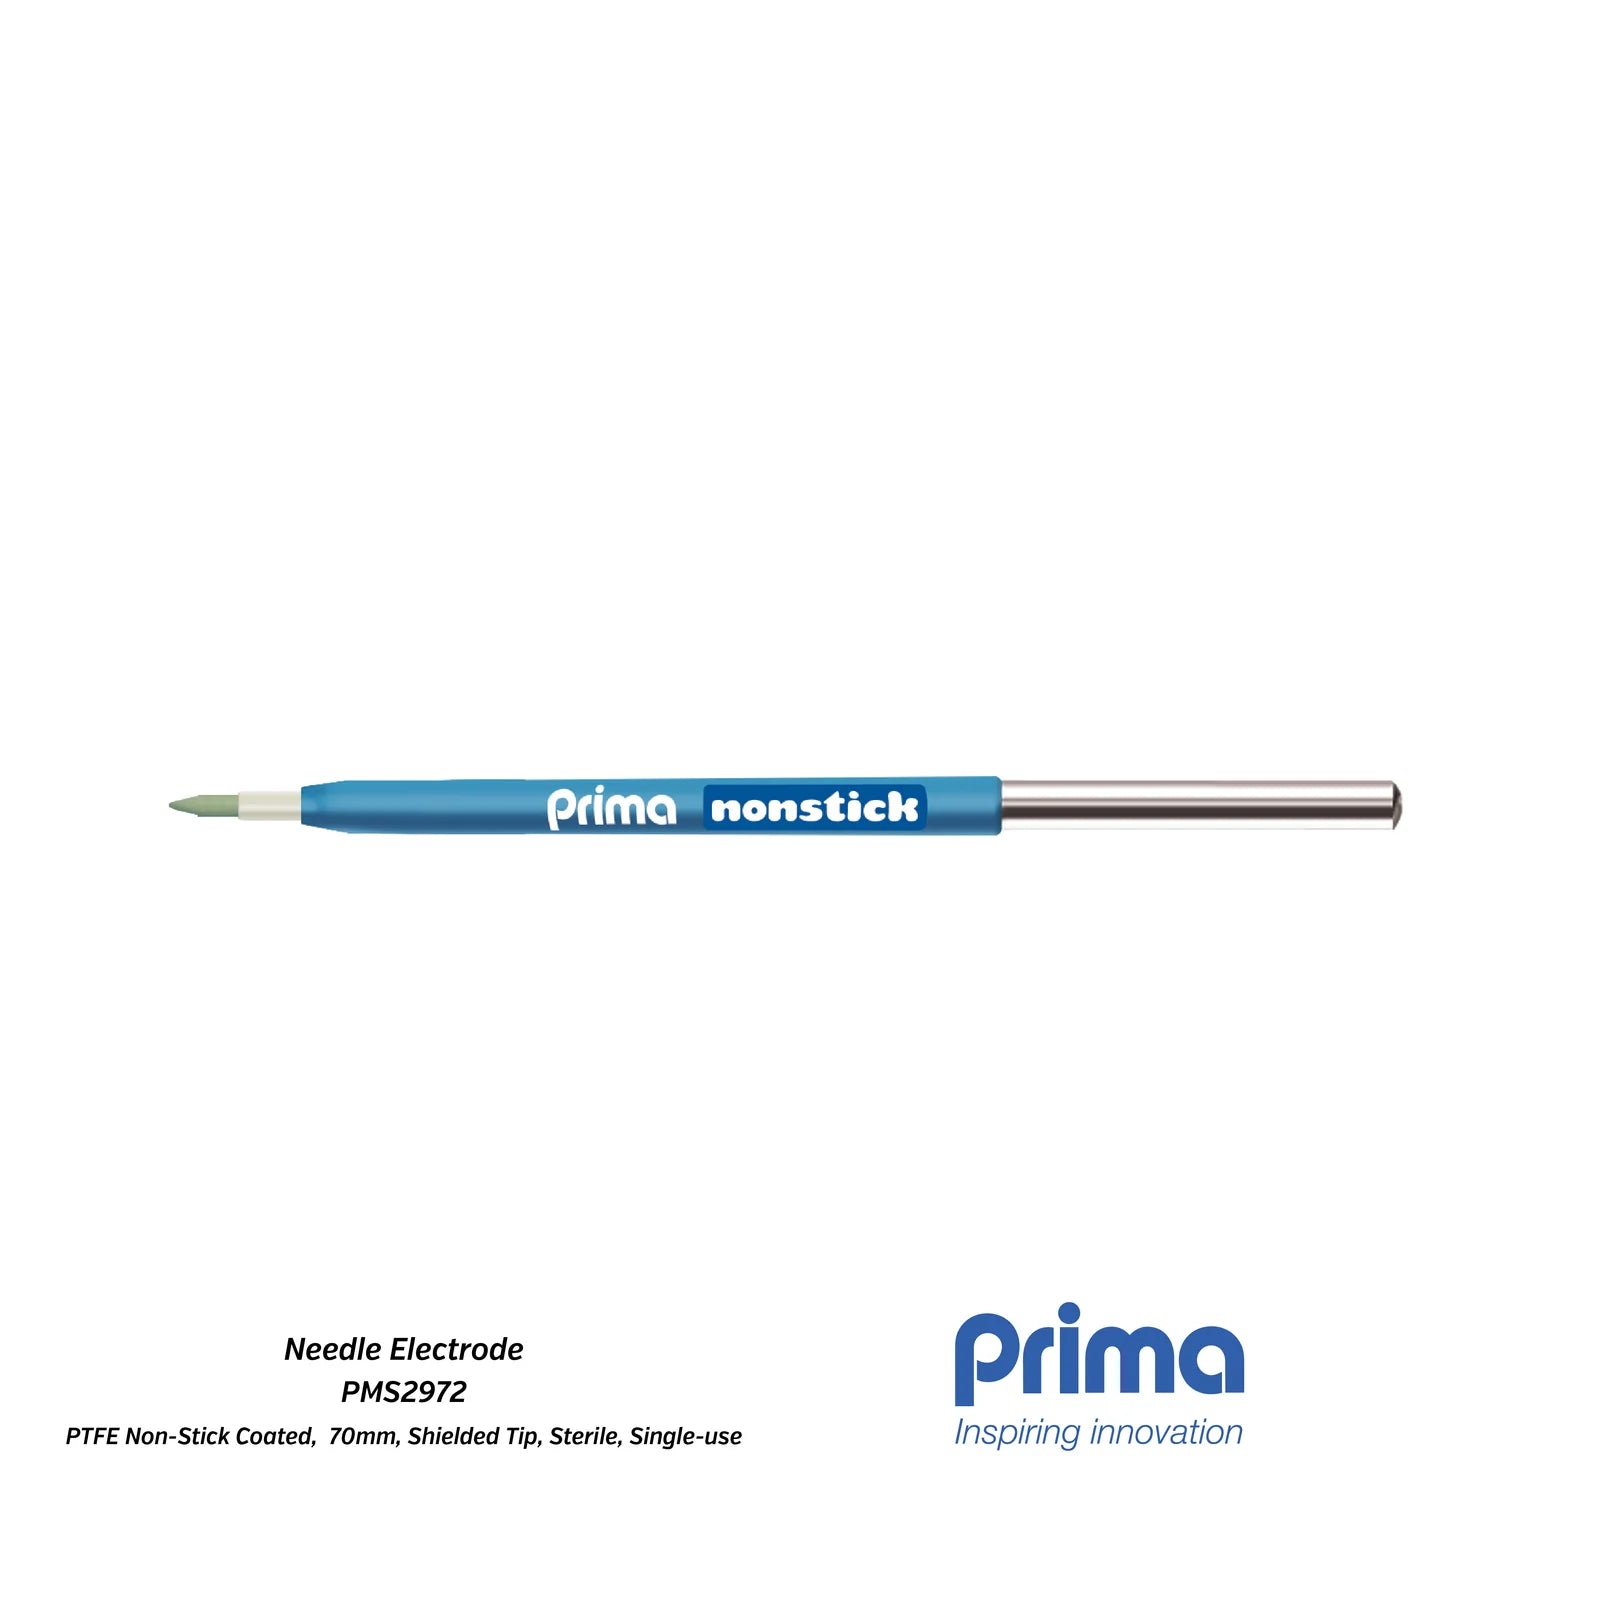 Needle Electrode (PTFE Non-Stick Coated, Shielded Tip, 70mm LGTH)